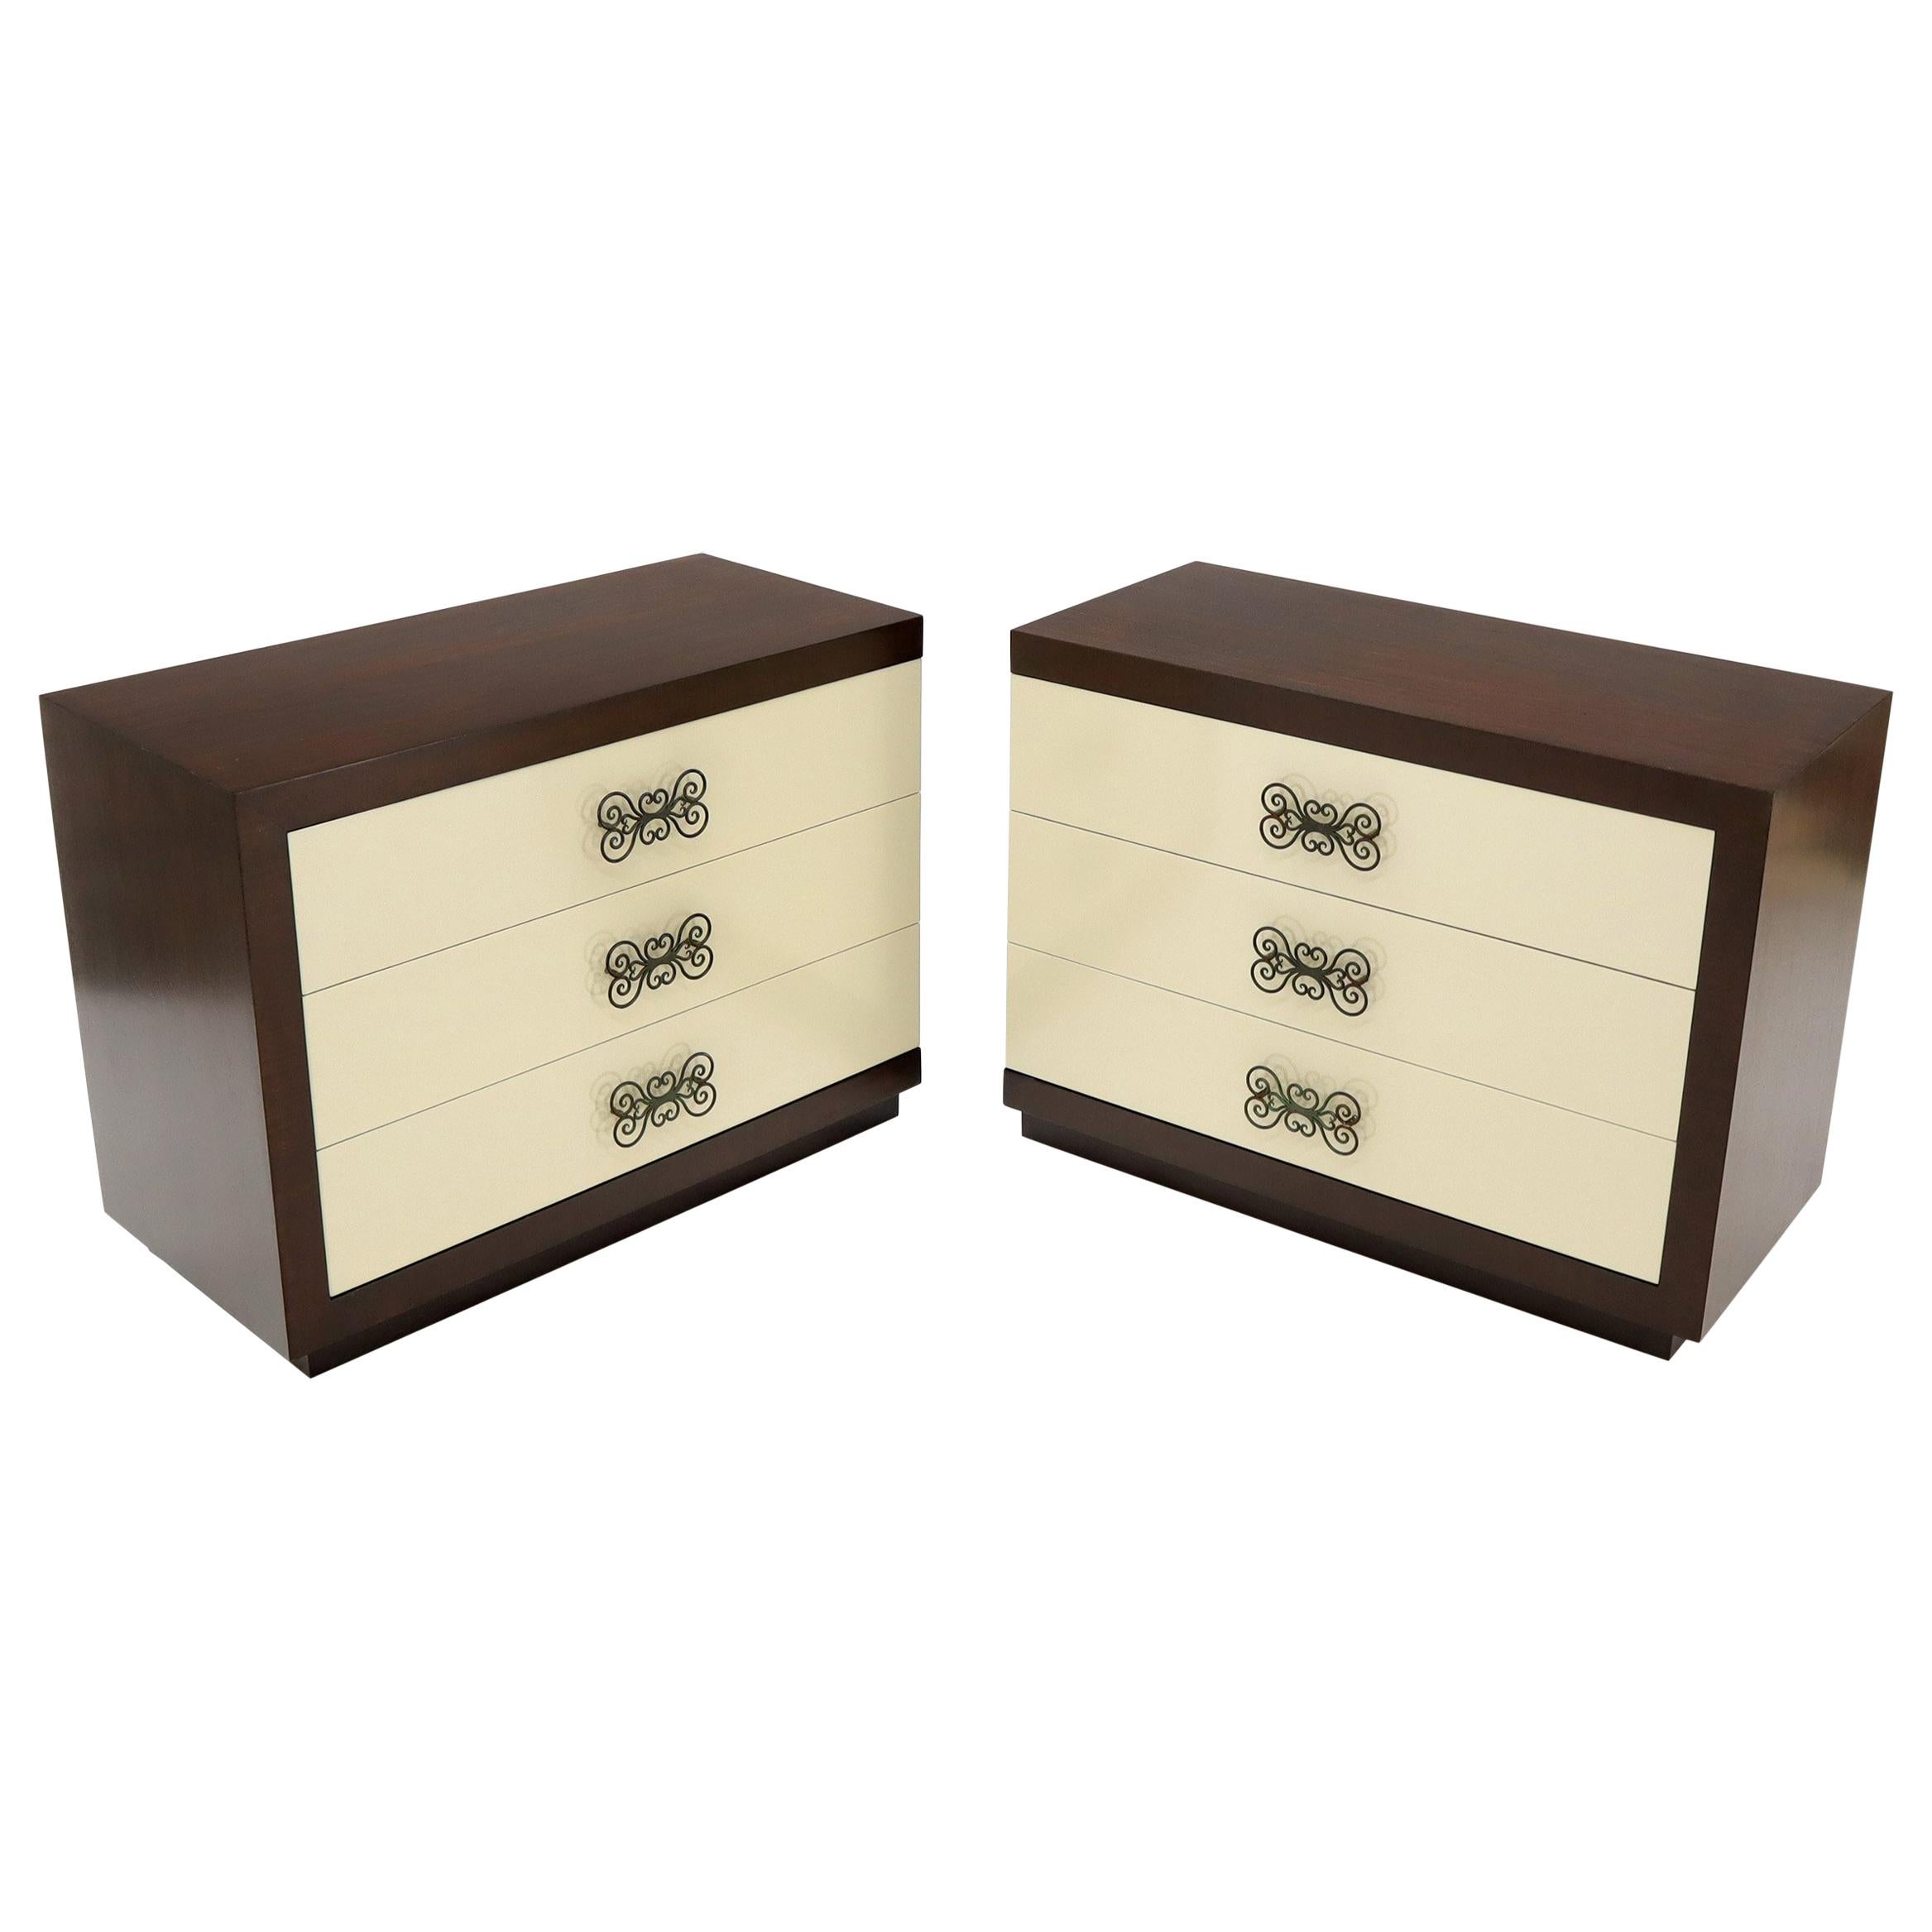 Pair of Two-Tone Mid-Century Modern Art Deco Bachelor Chests Dressers  For Sale